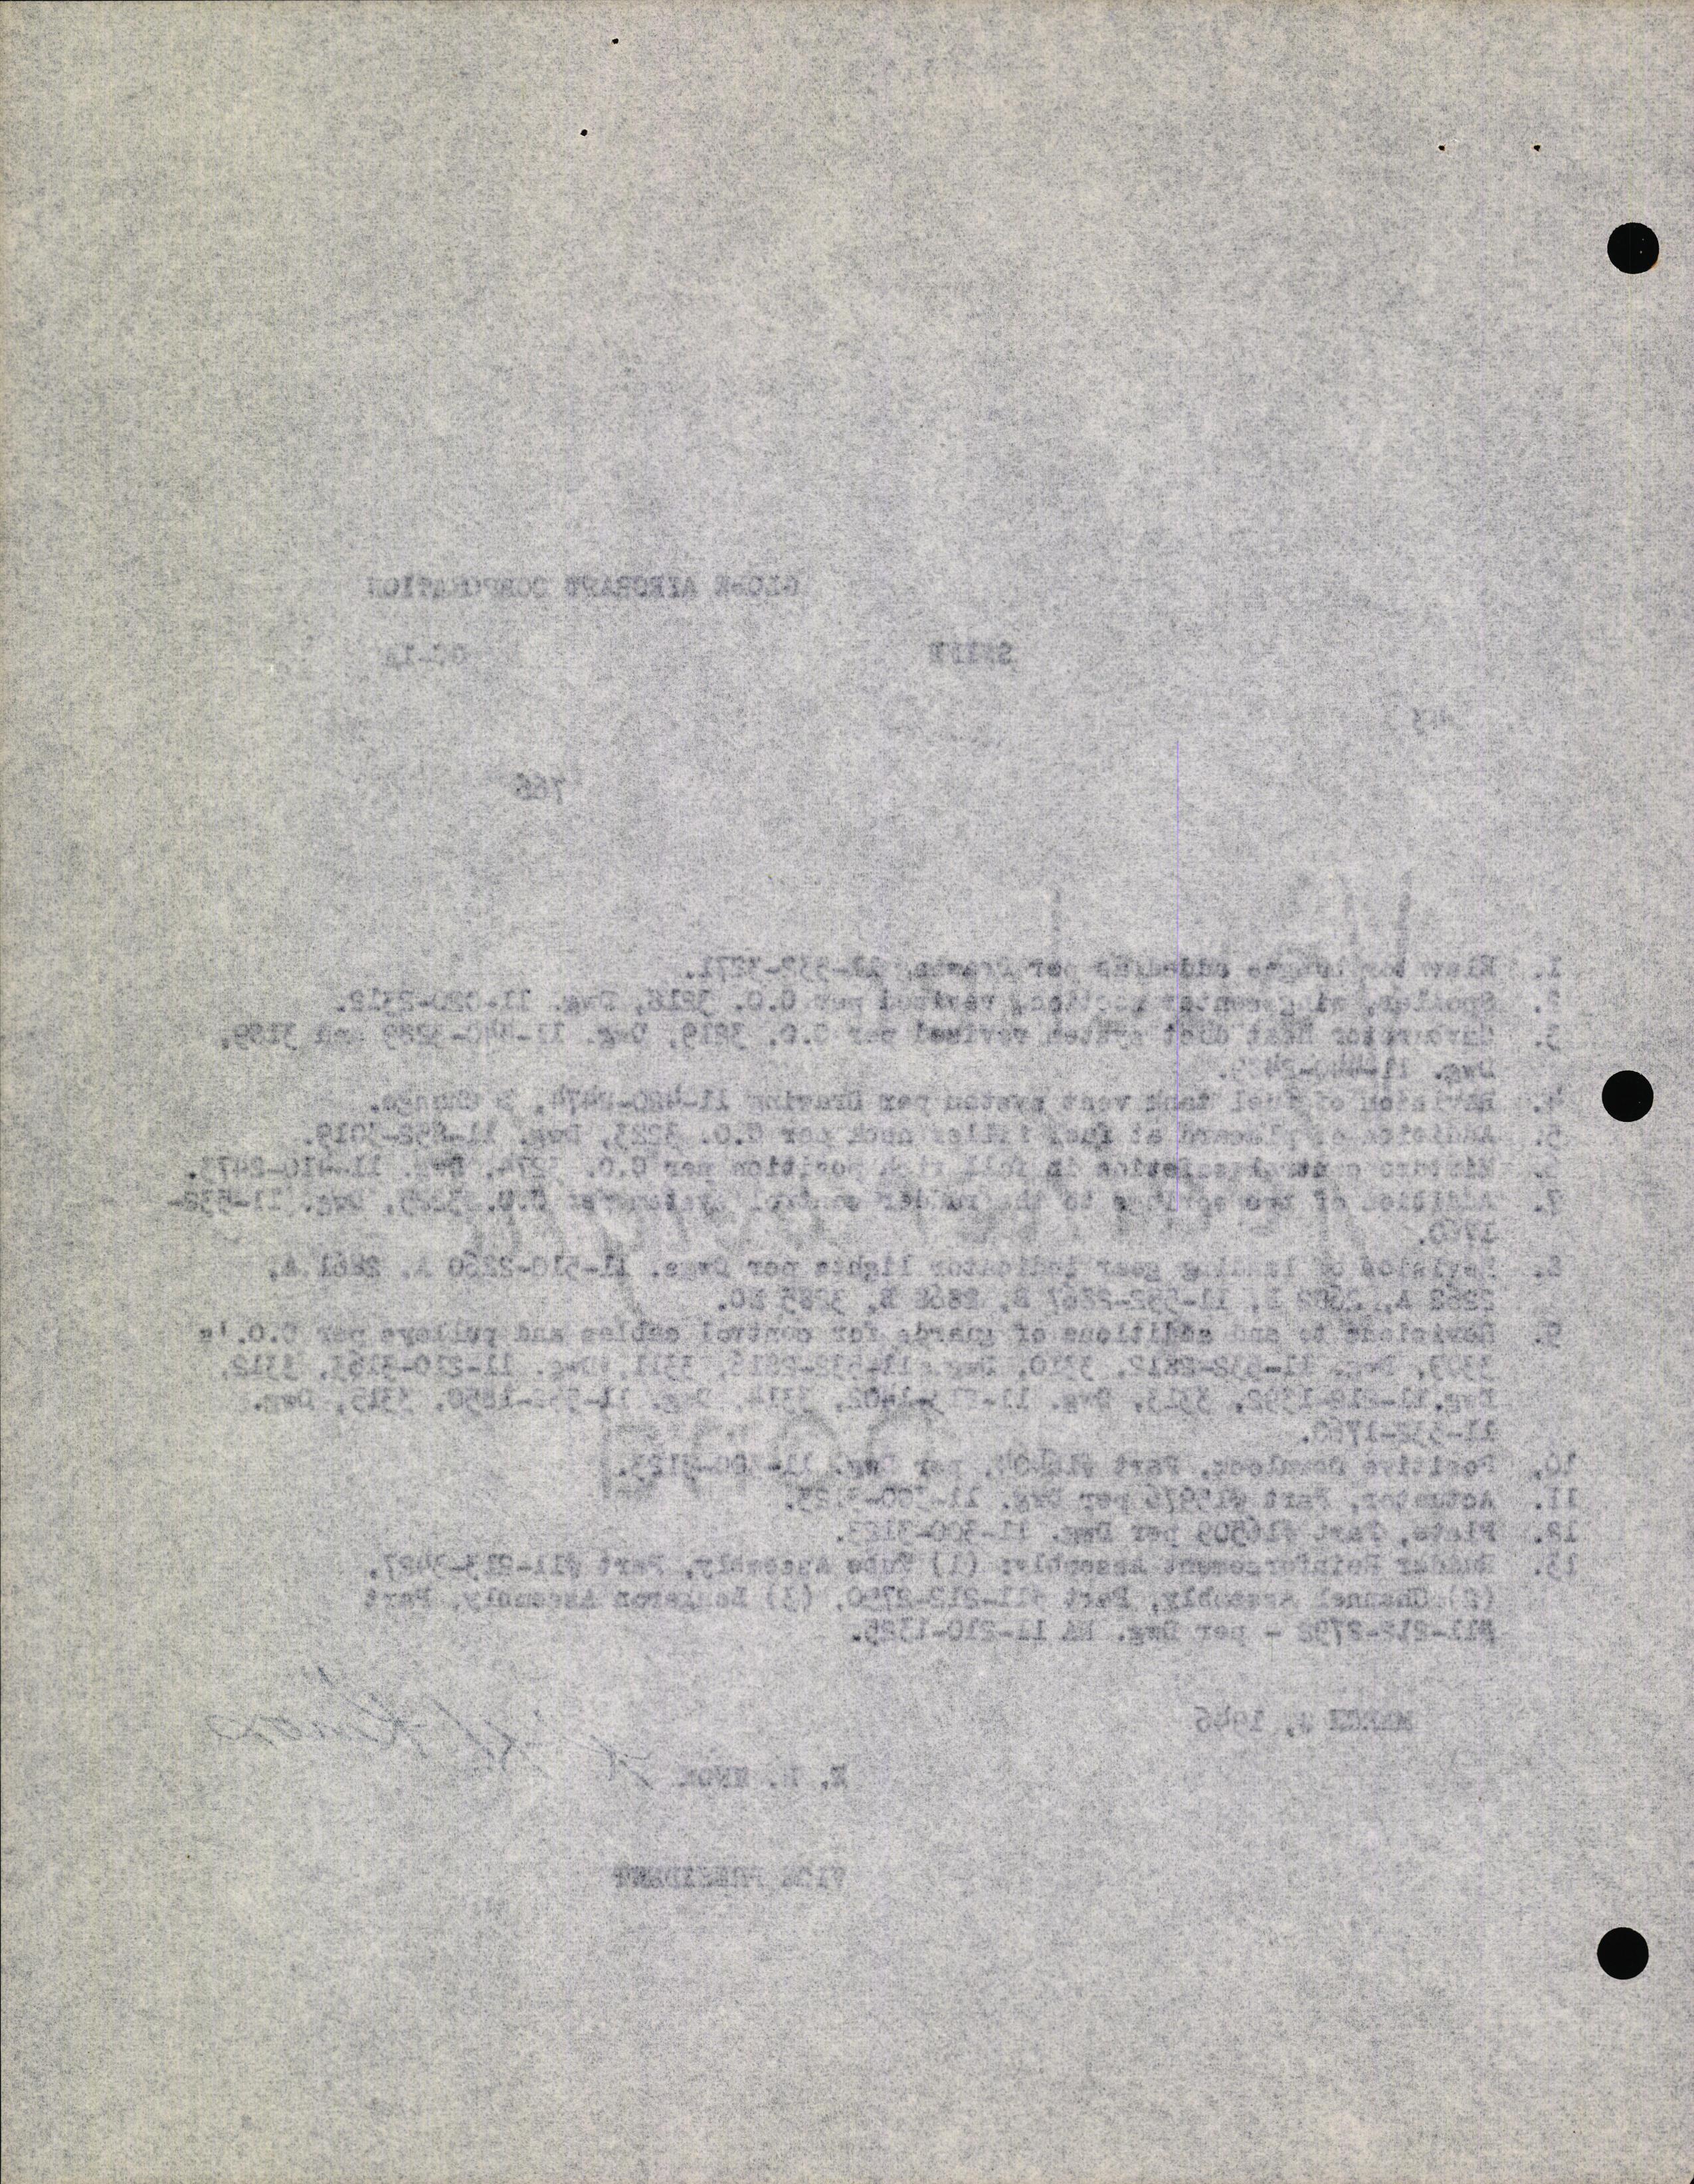 Sample page 8 from AirCorps Library document: Technical Information for Serial Number 43